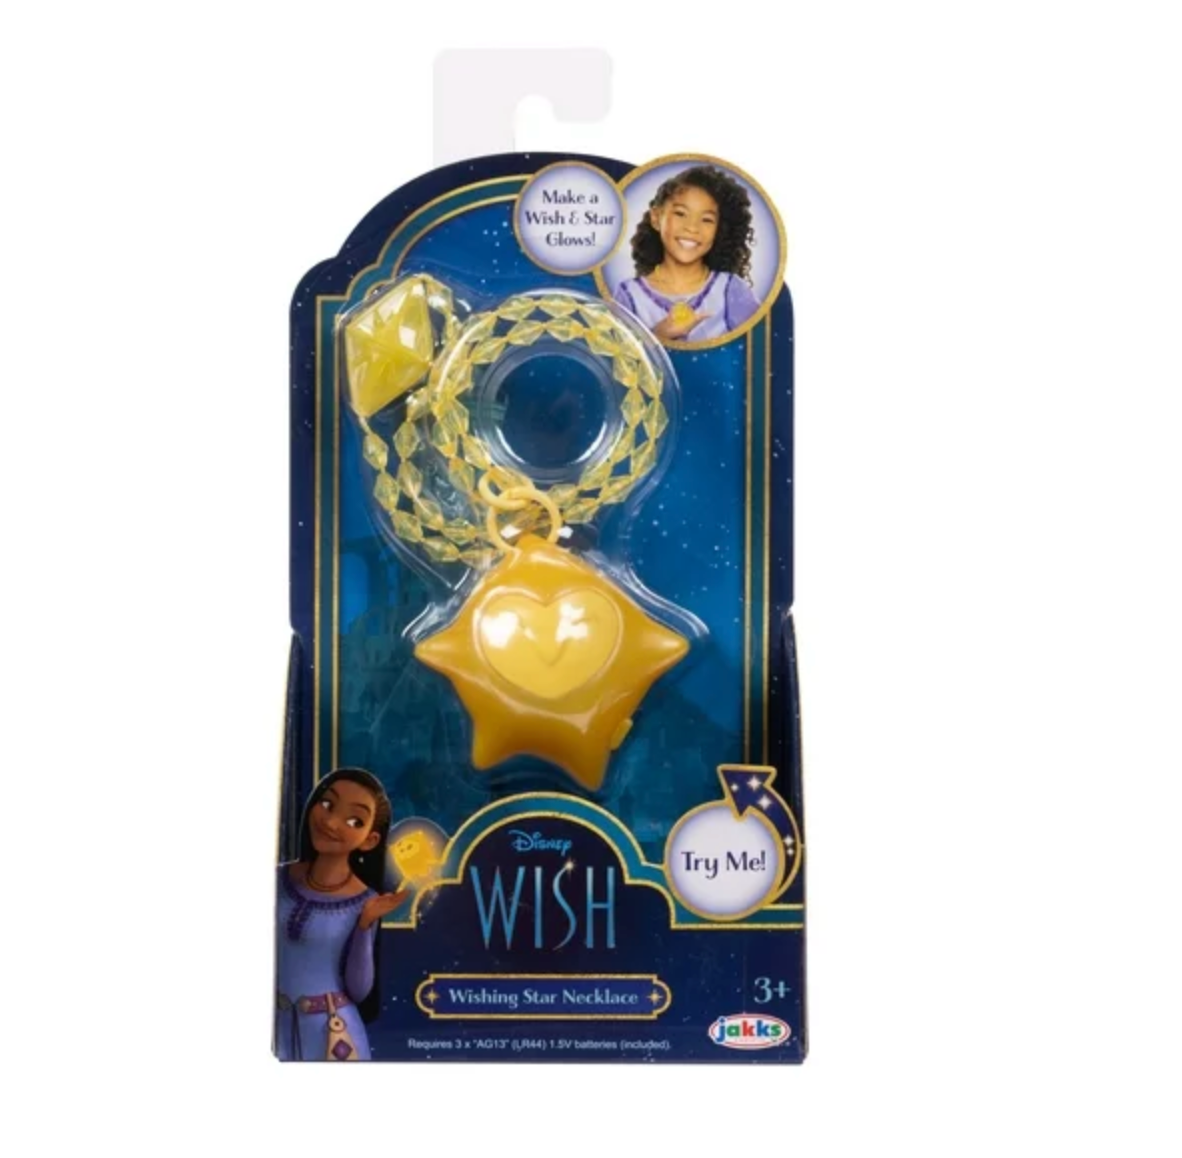 Disney 100 Wish Wishing Light Up Star Necklace Toy New with Box